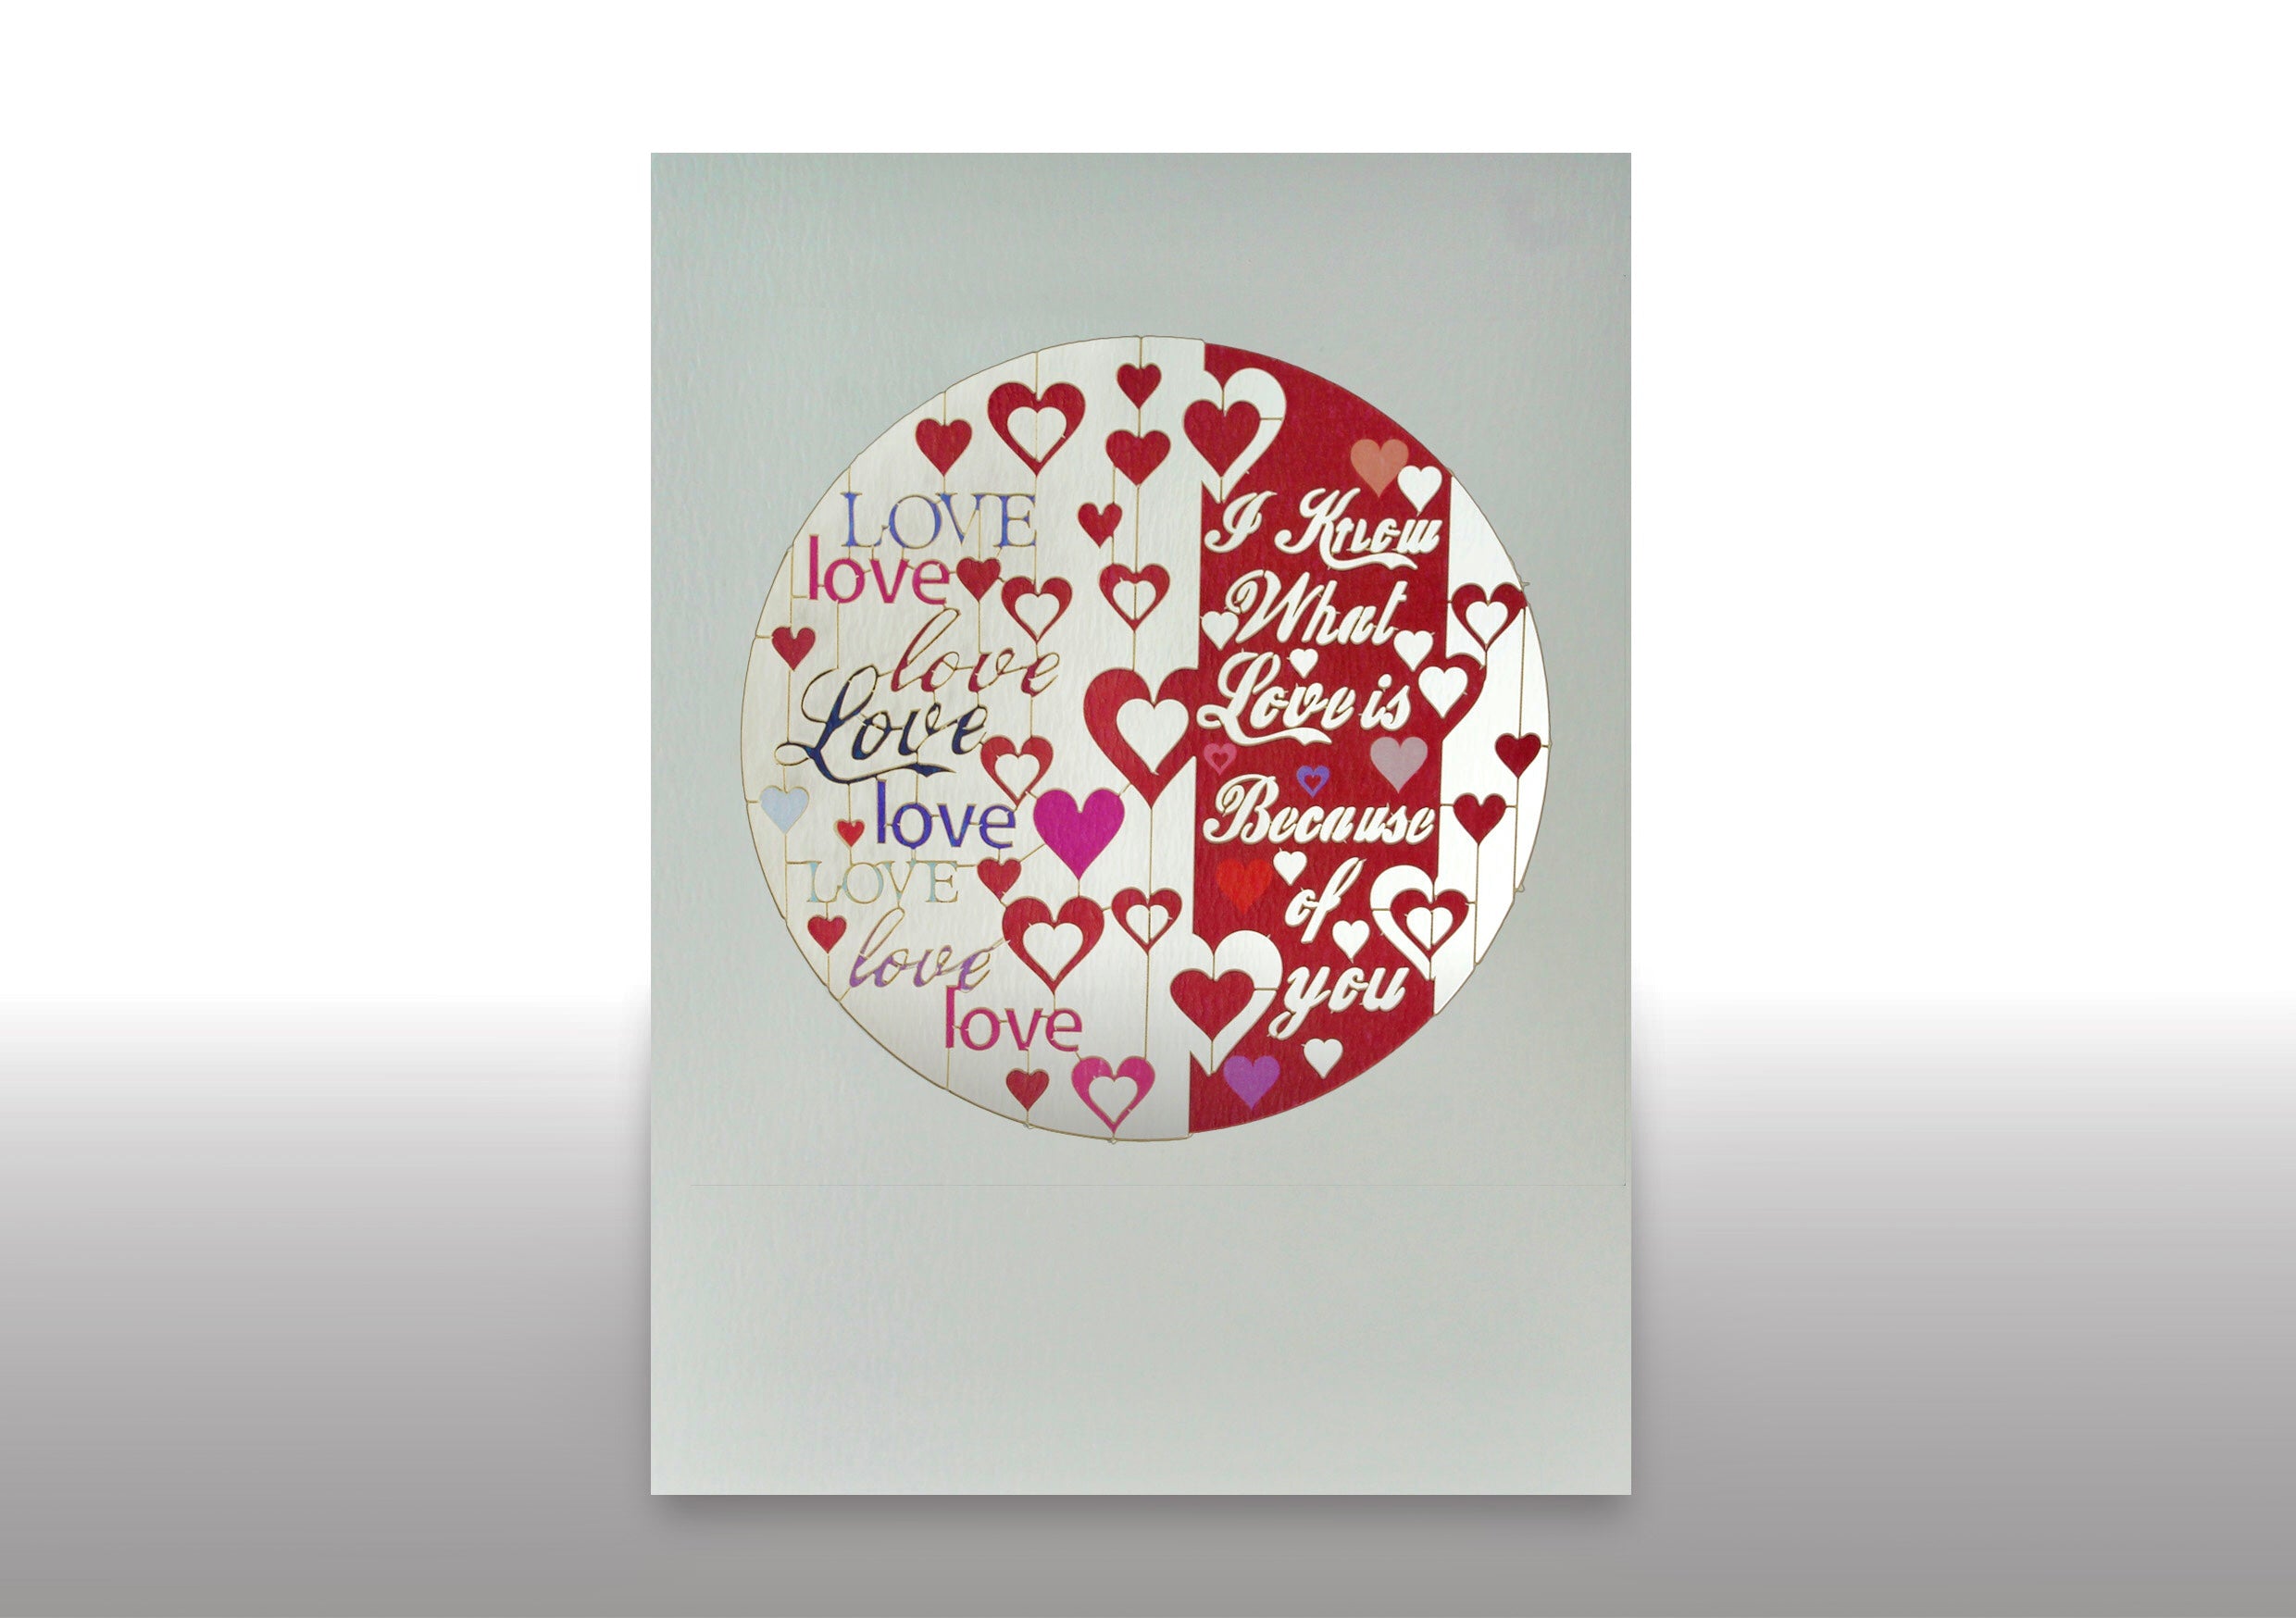 Valentines Because of You 3D Cut Out Anniversary Wedding Birthday Greeting Card